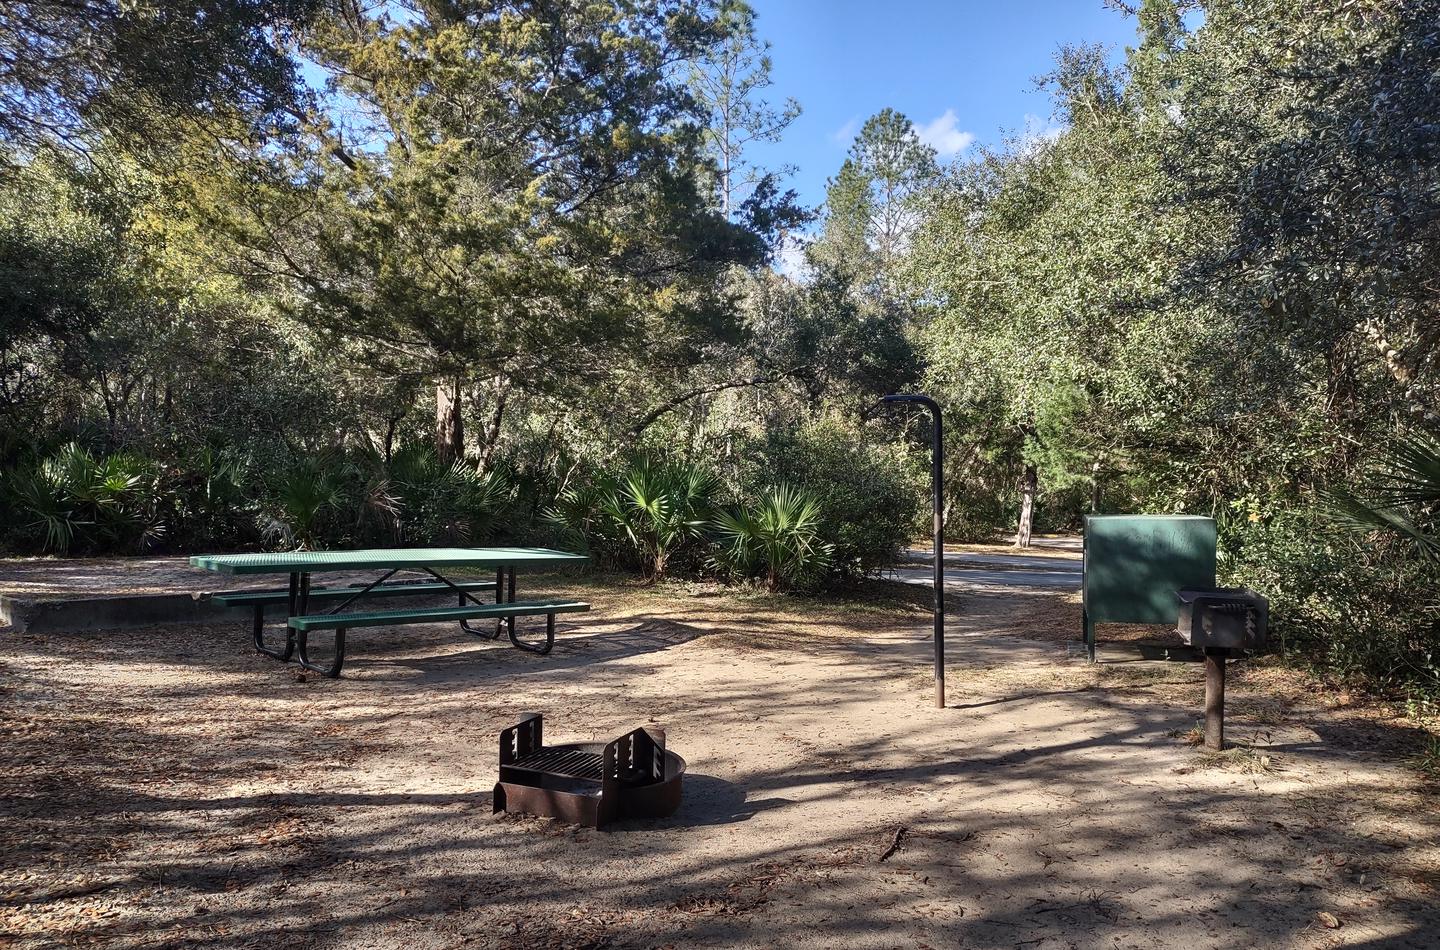 Last view of site 46Amenities: picnic table, fire ring, grill, light pole, bear-proof storage locker